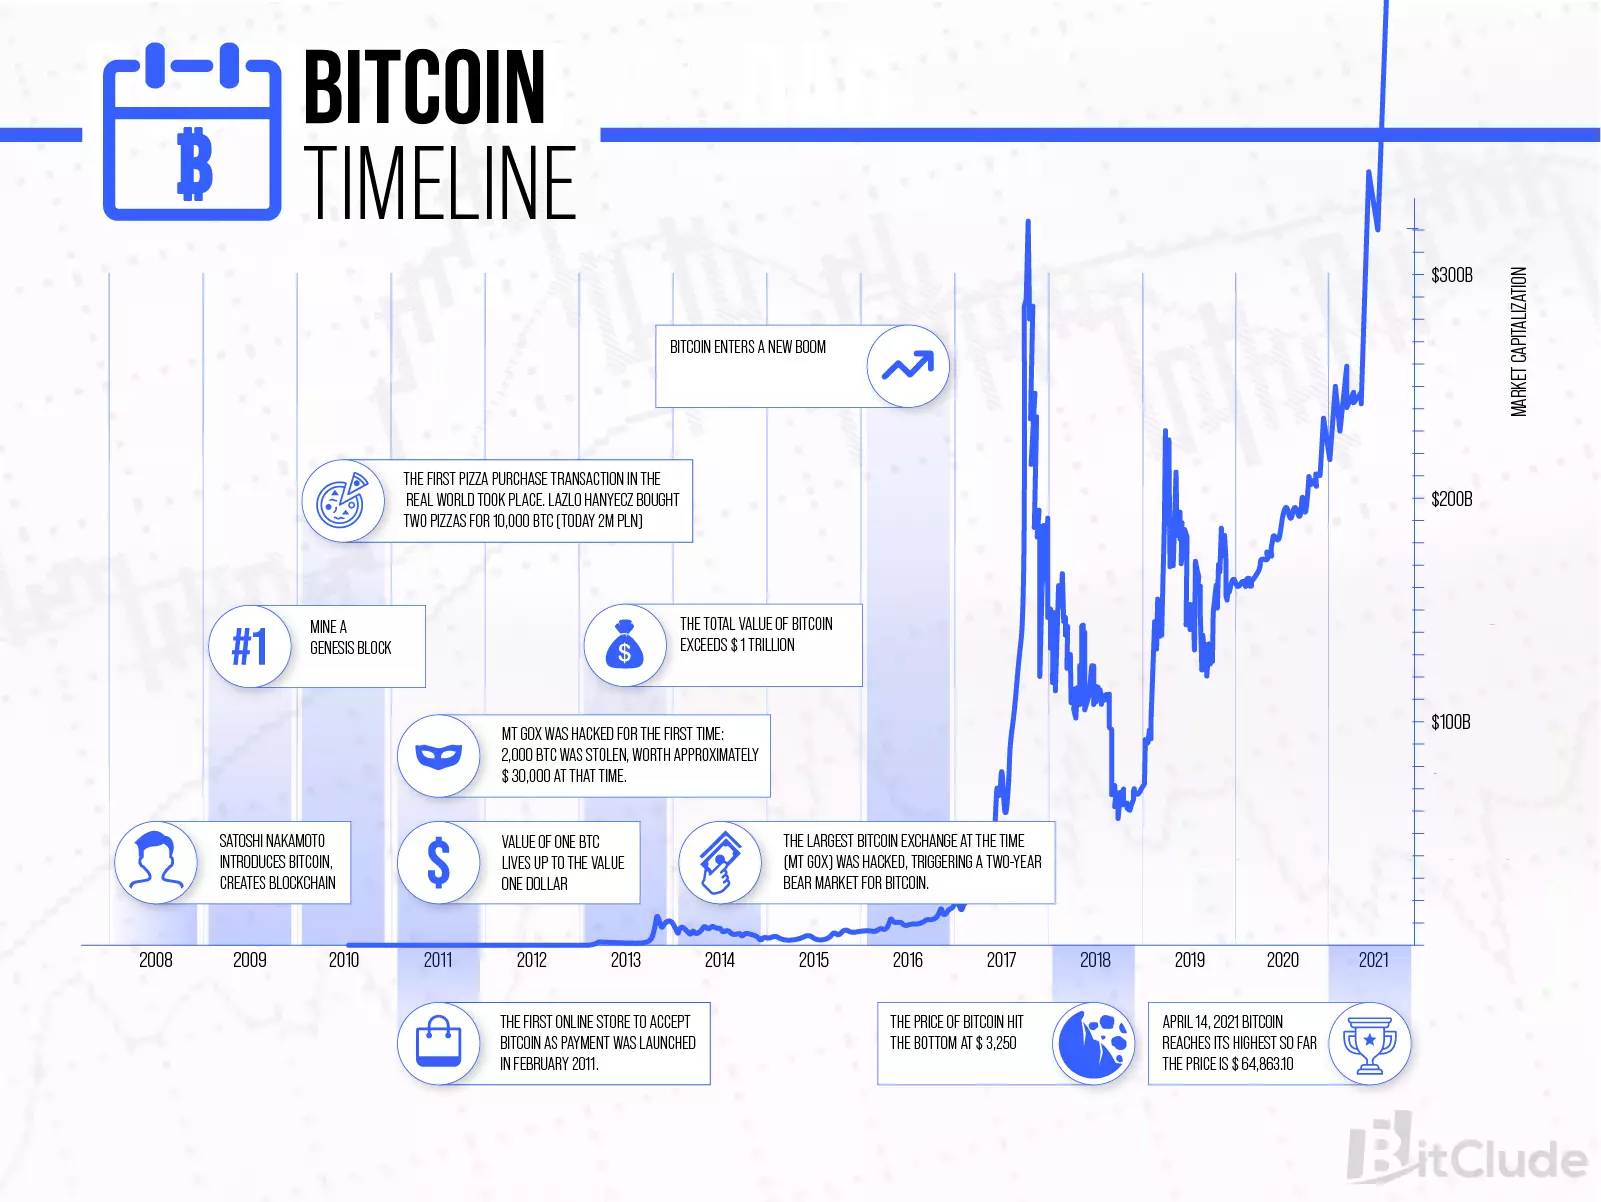 History of Bitcoin on timeline.